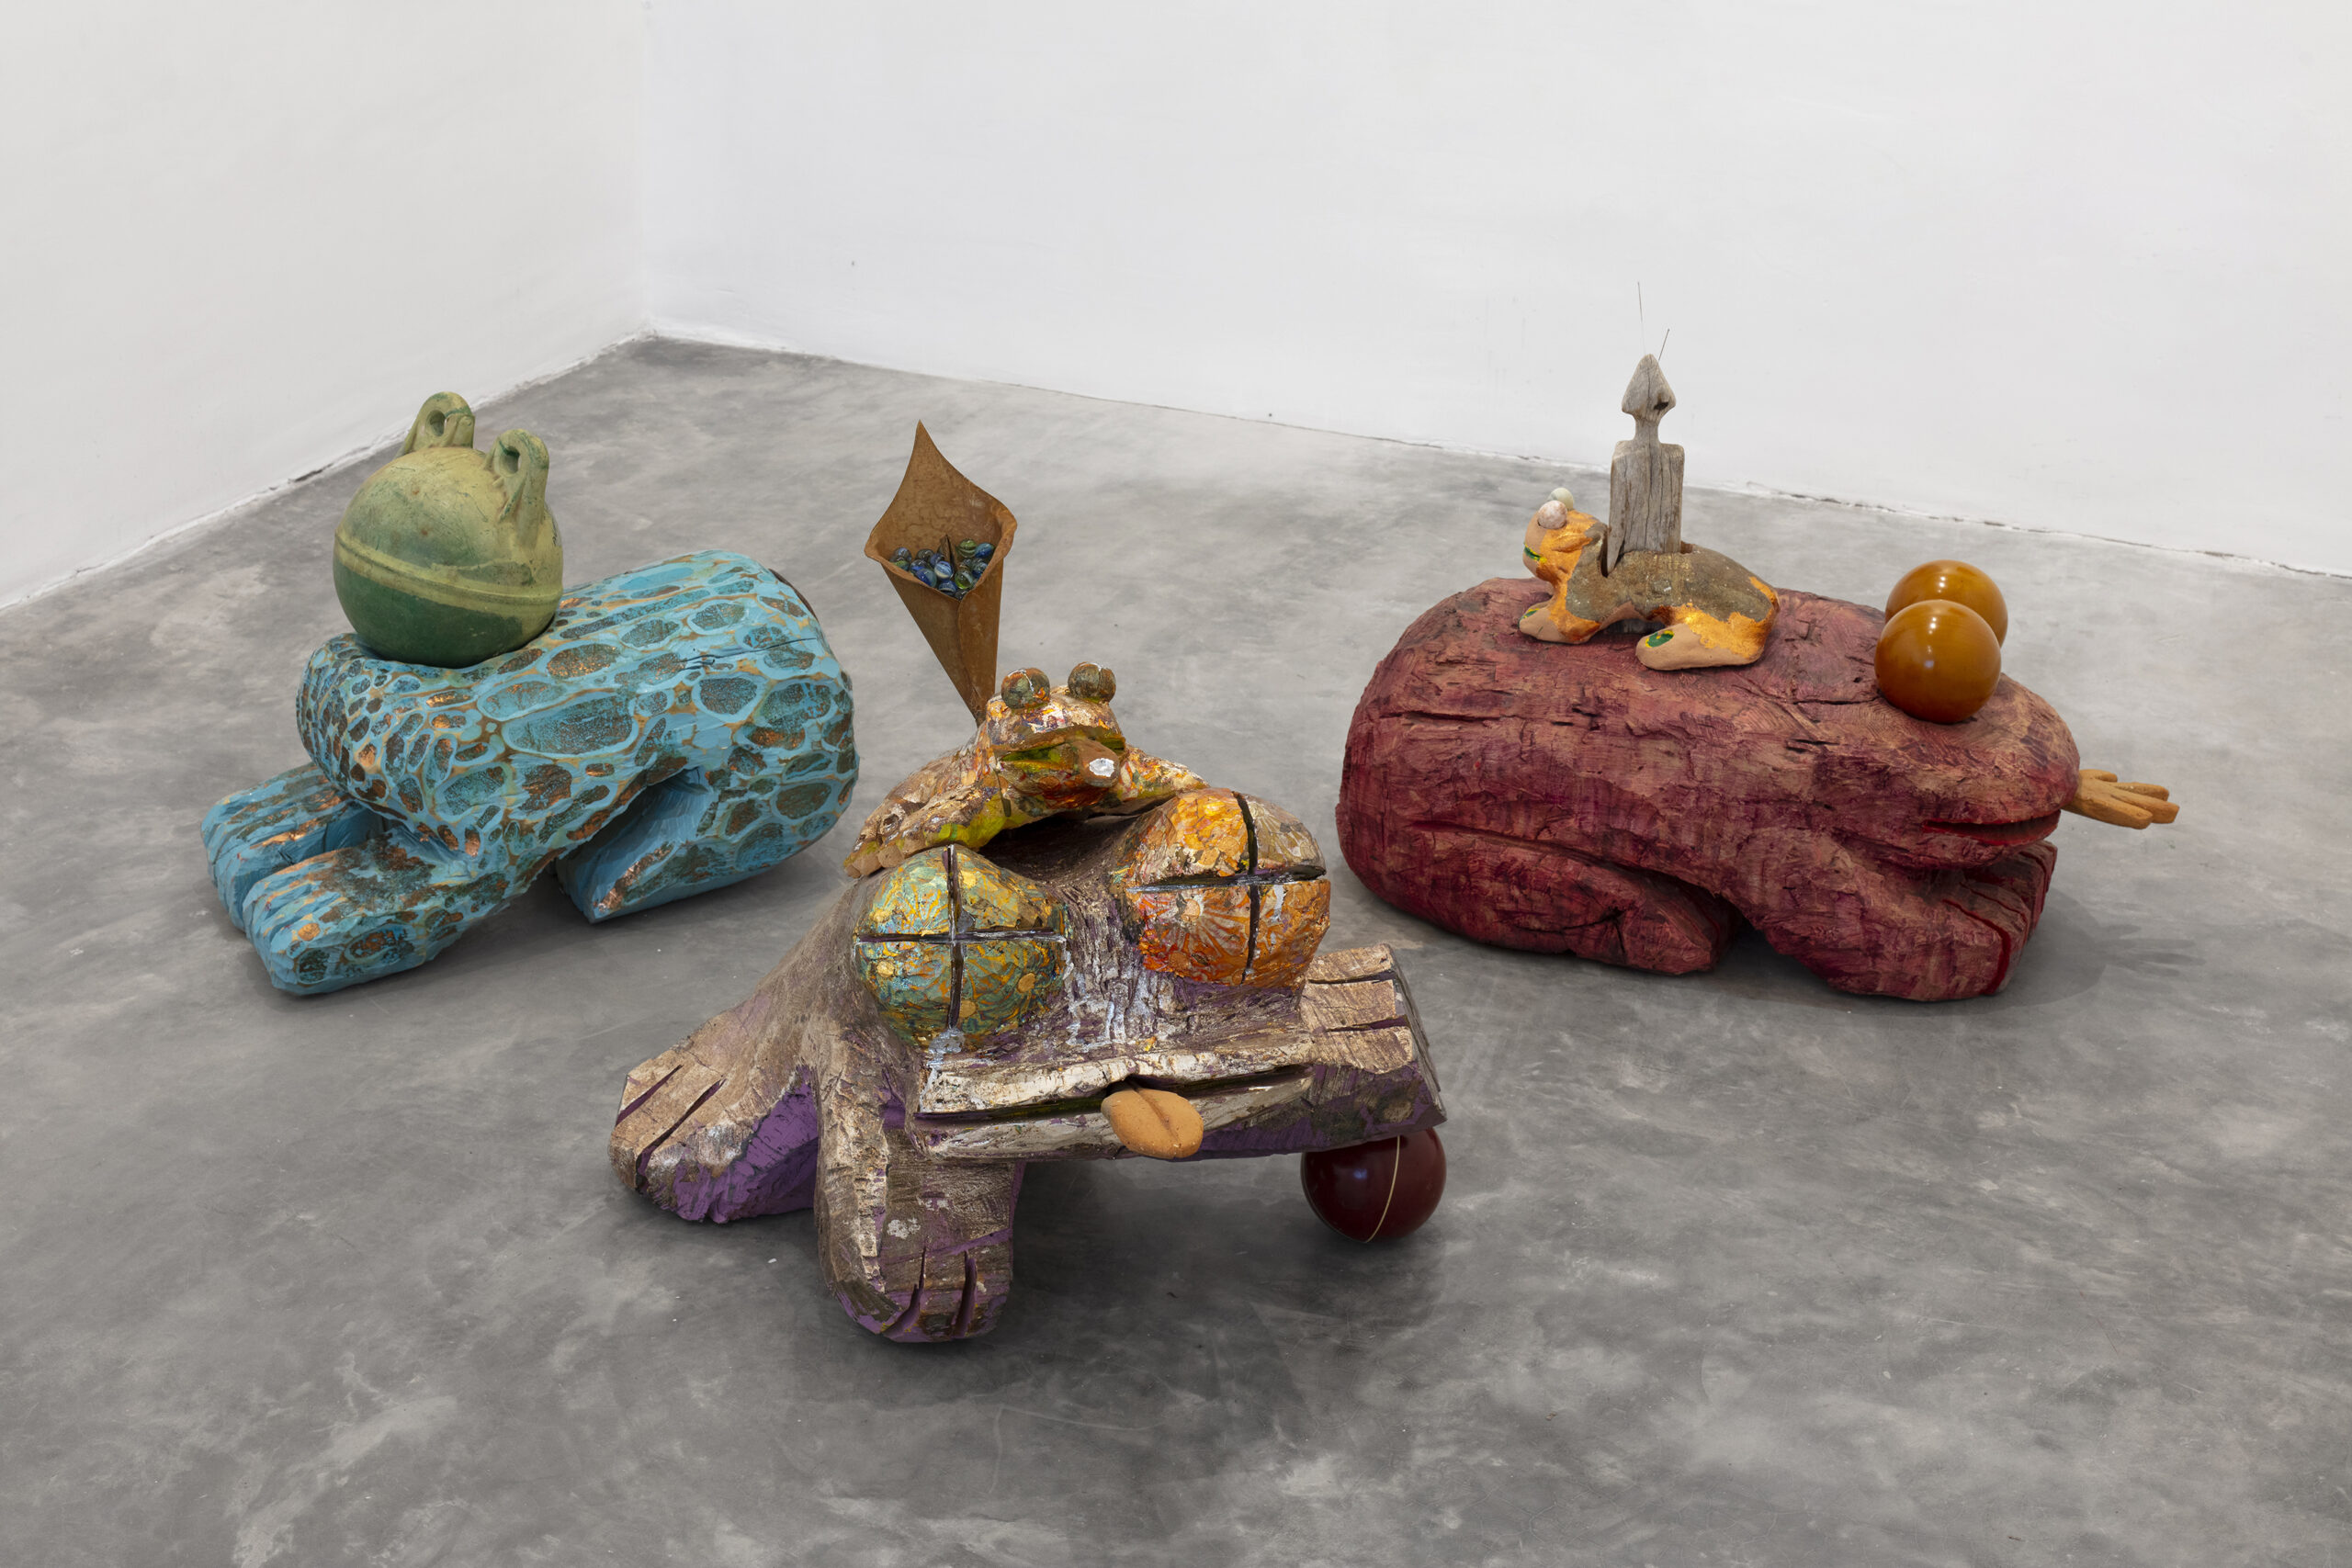 Three sculptures by Ramiro Chaves, as exhibited in Nosotrxs, 2022